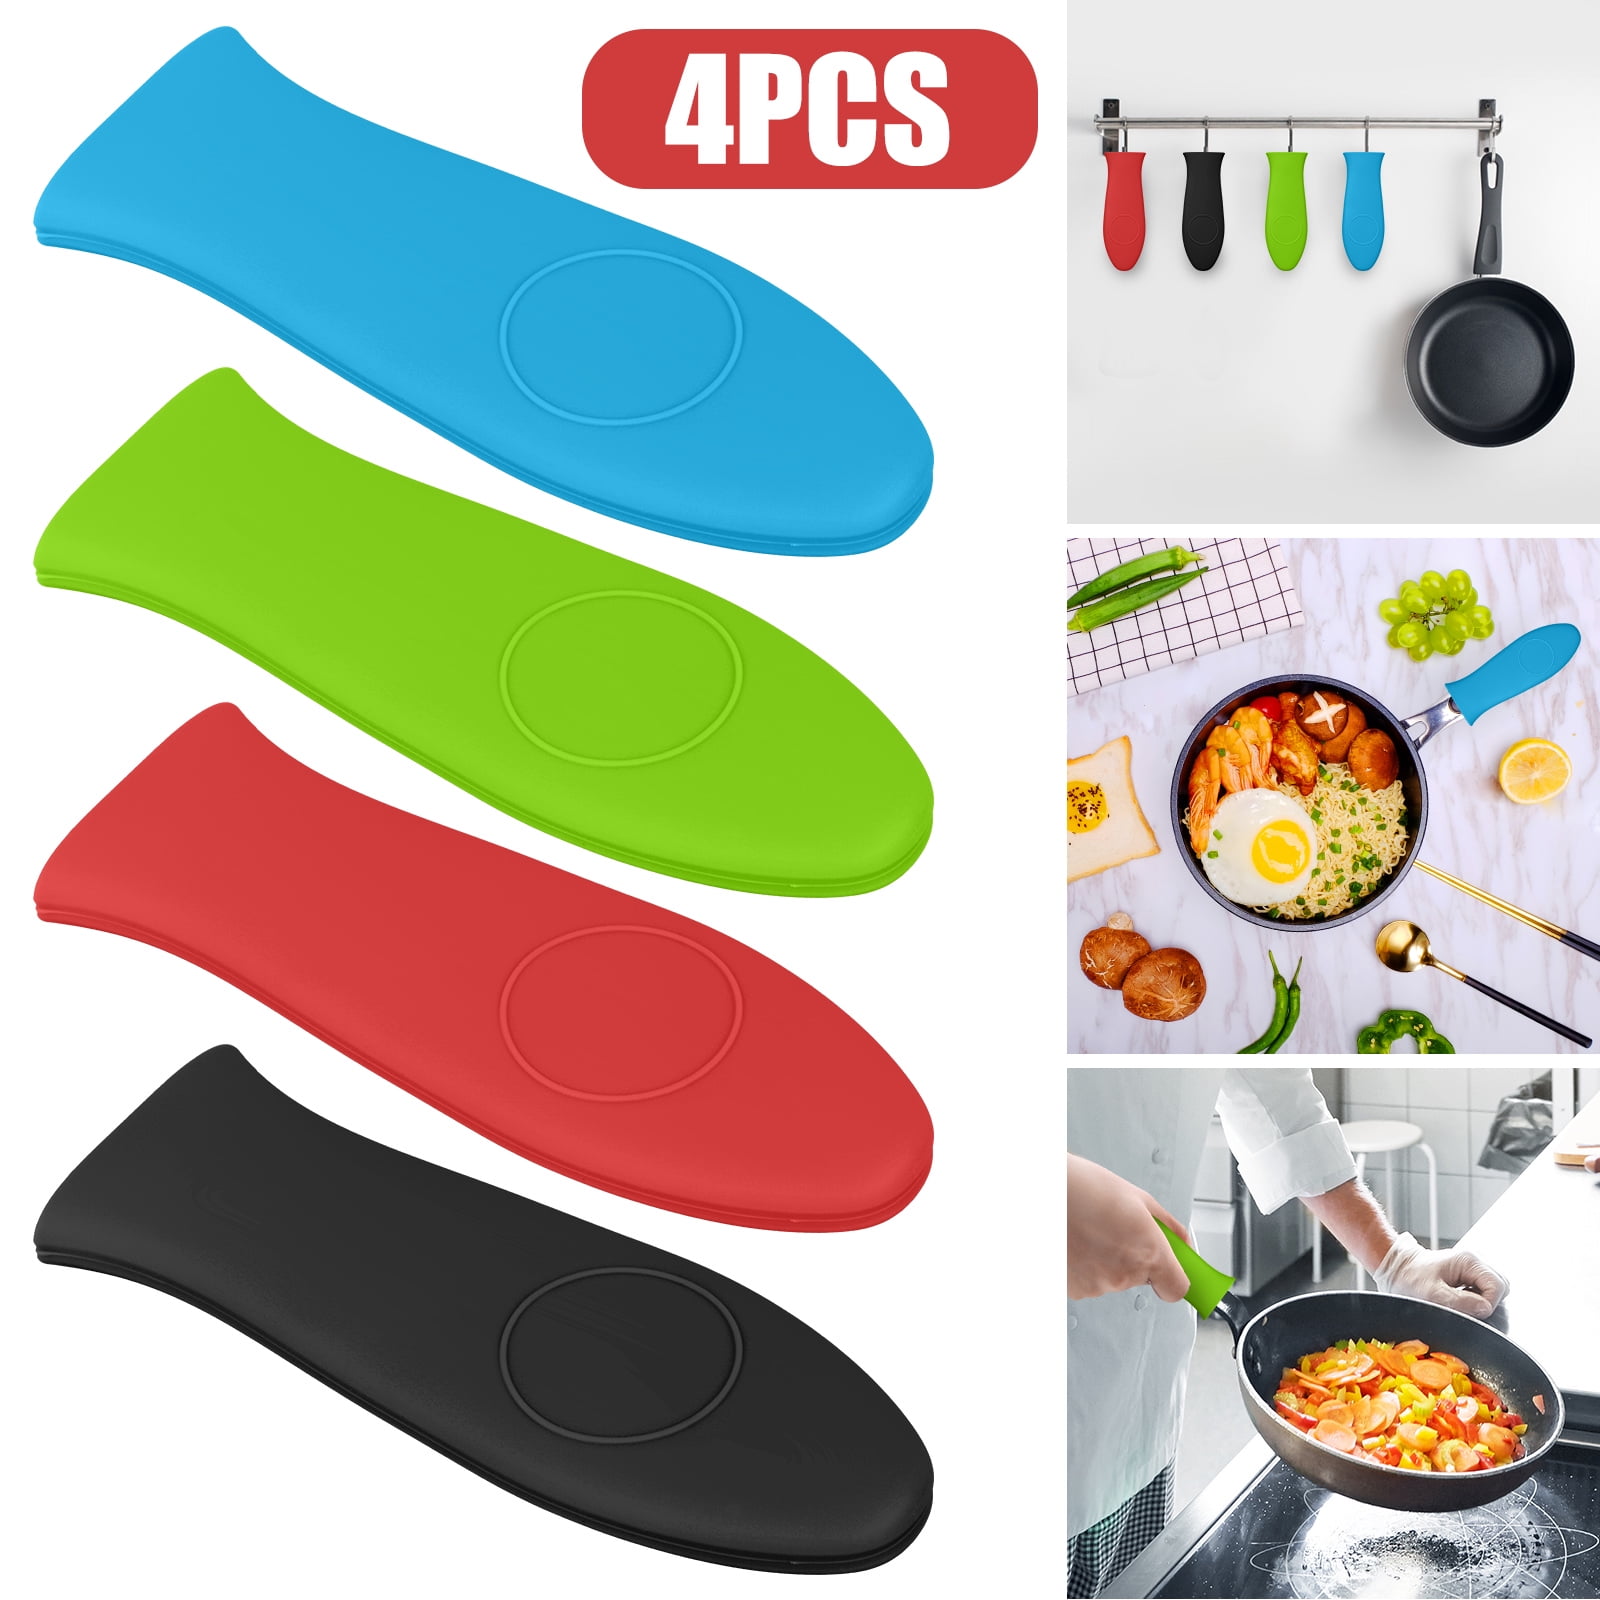 Pot Holder For Skillet Handle Cast Iron Hot Fry Pan Cover Silicone Rubber Covers 